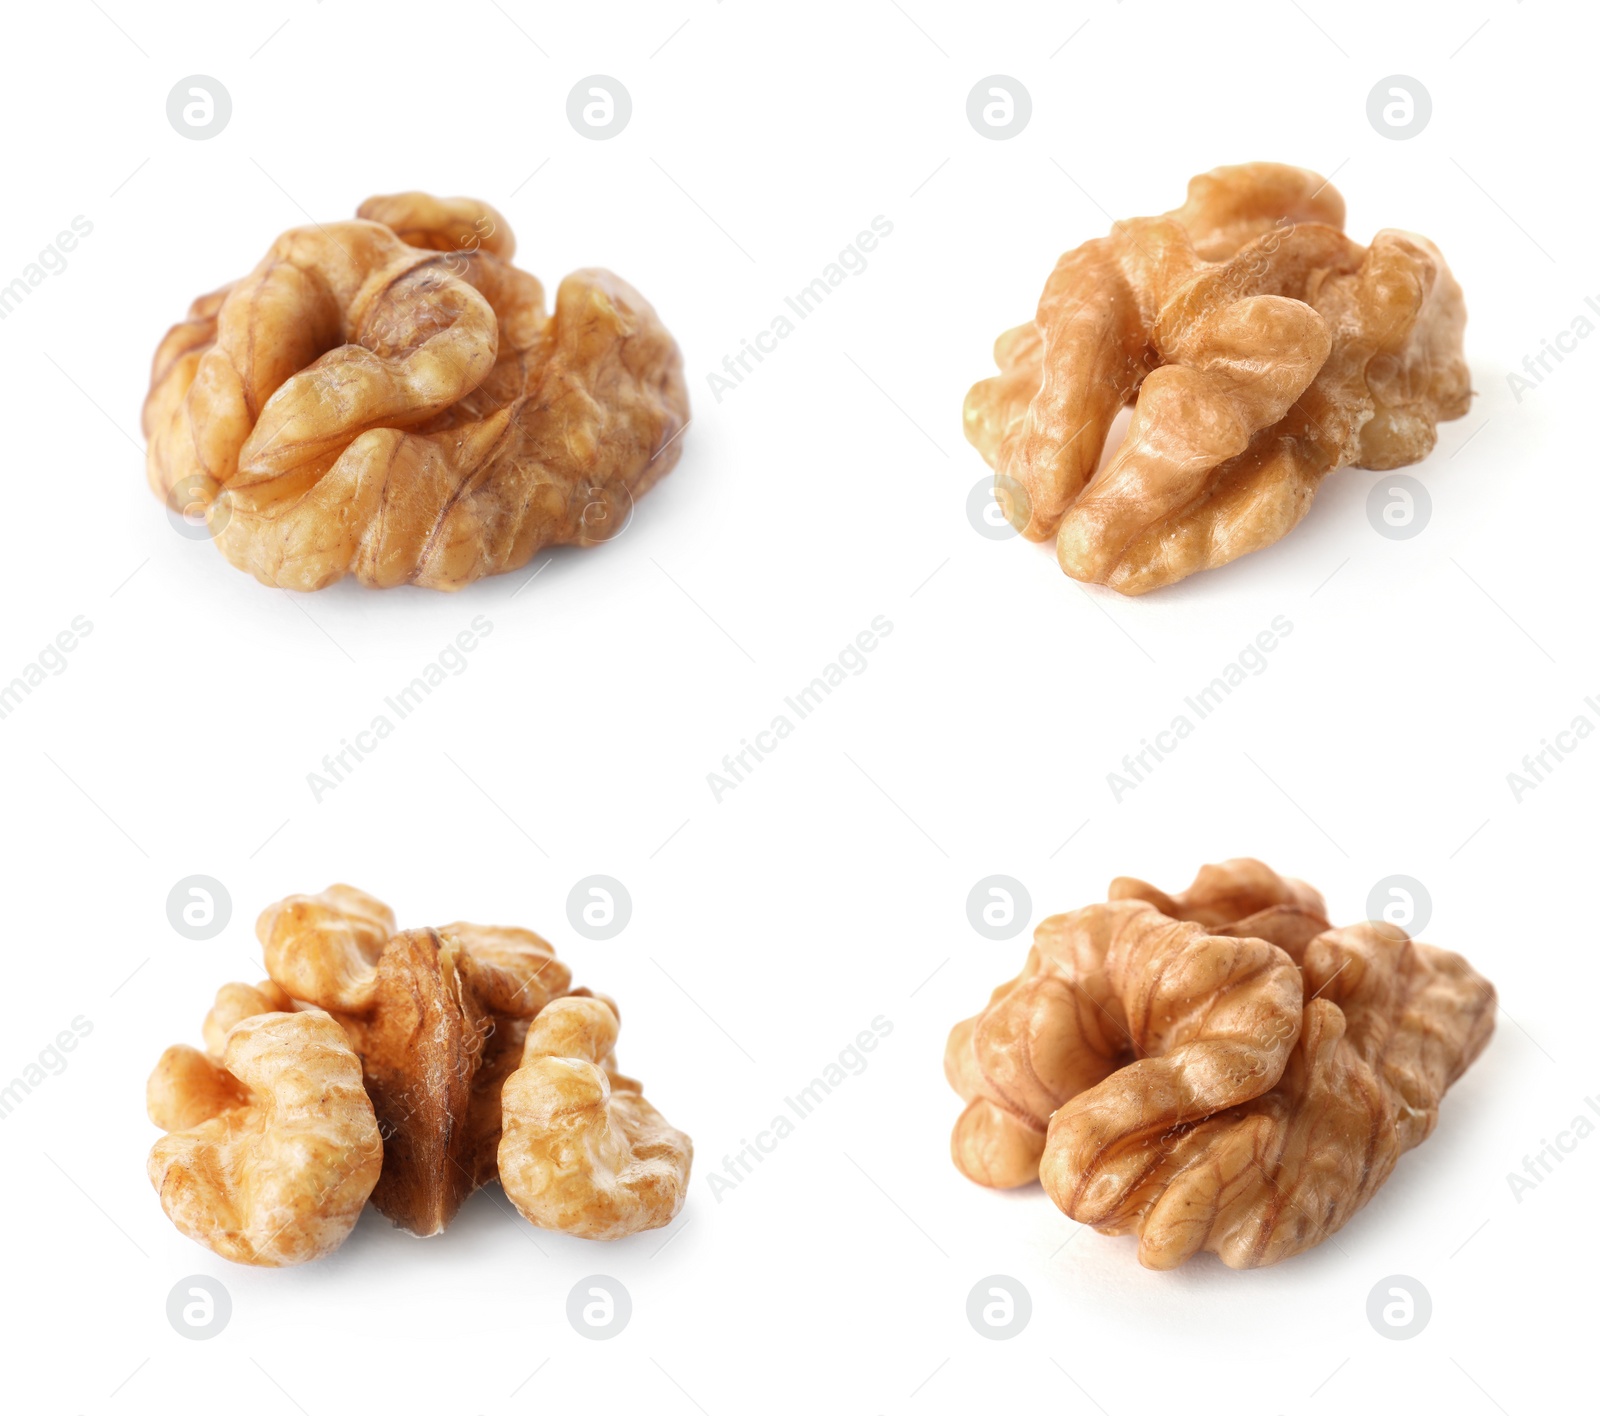 Image of Set with tasty walnuts on white background